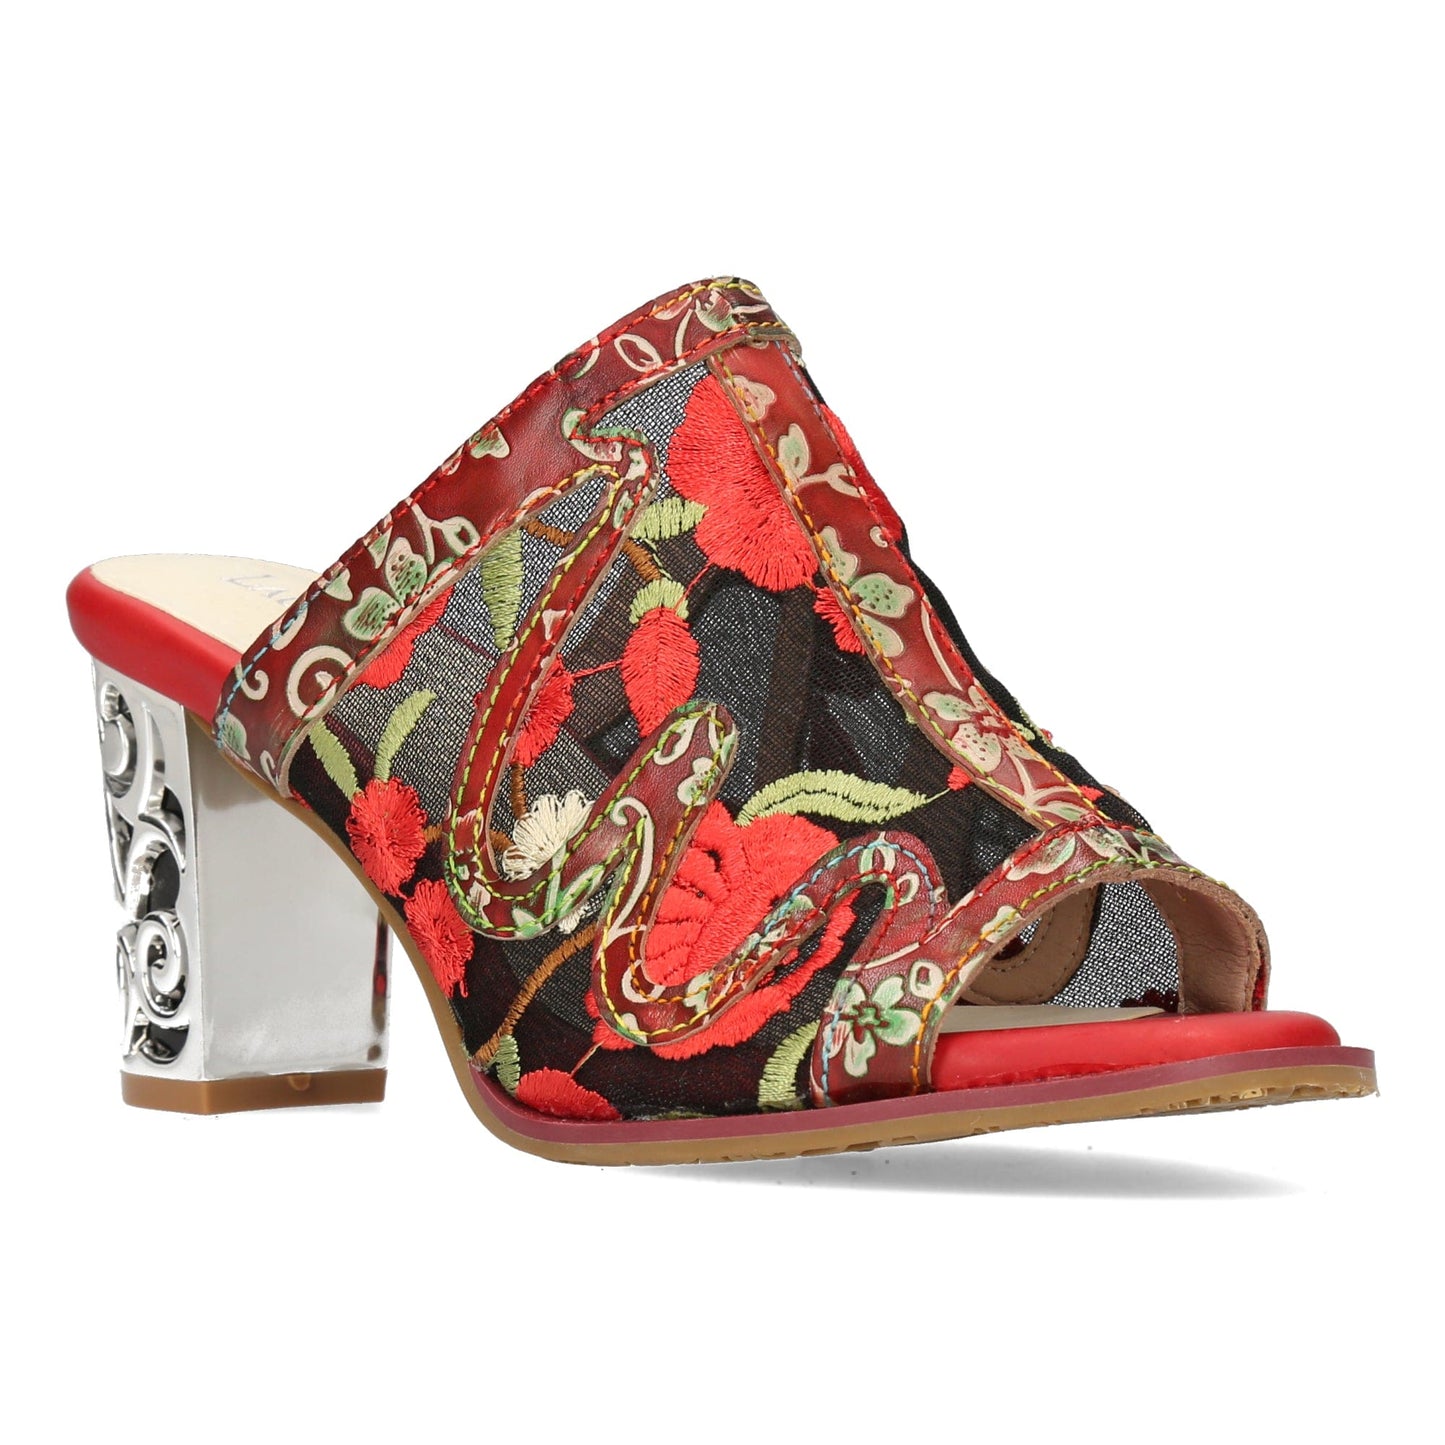 laura vita red uk post included  sale £54.95